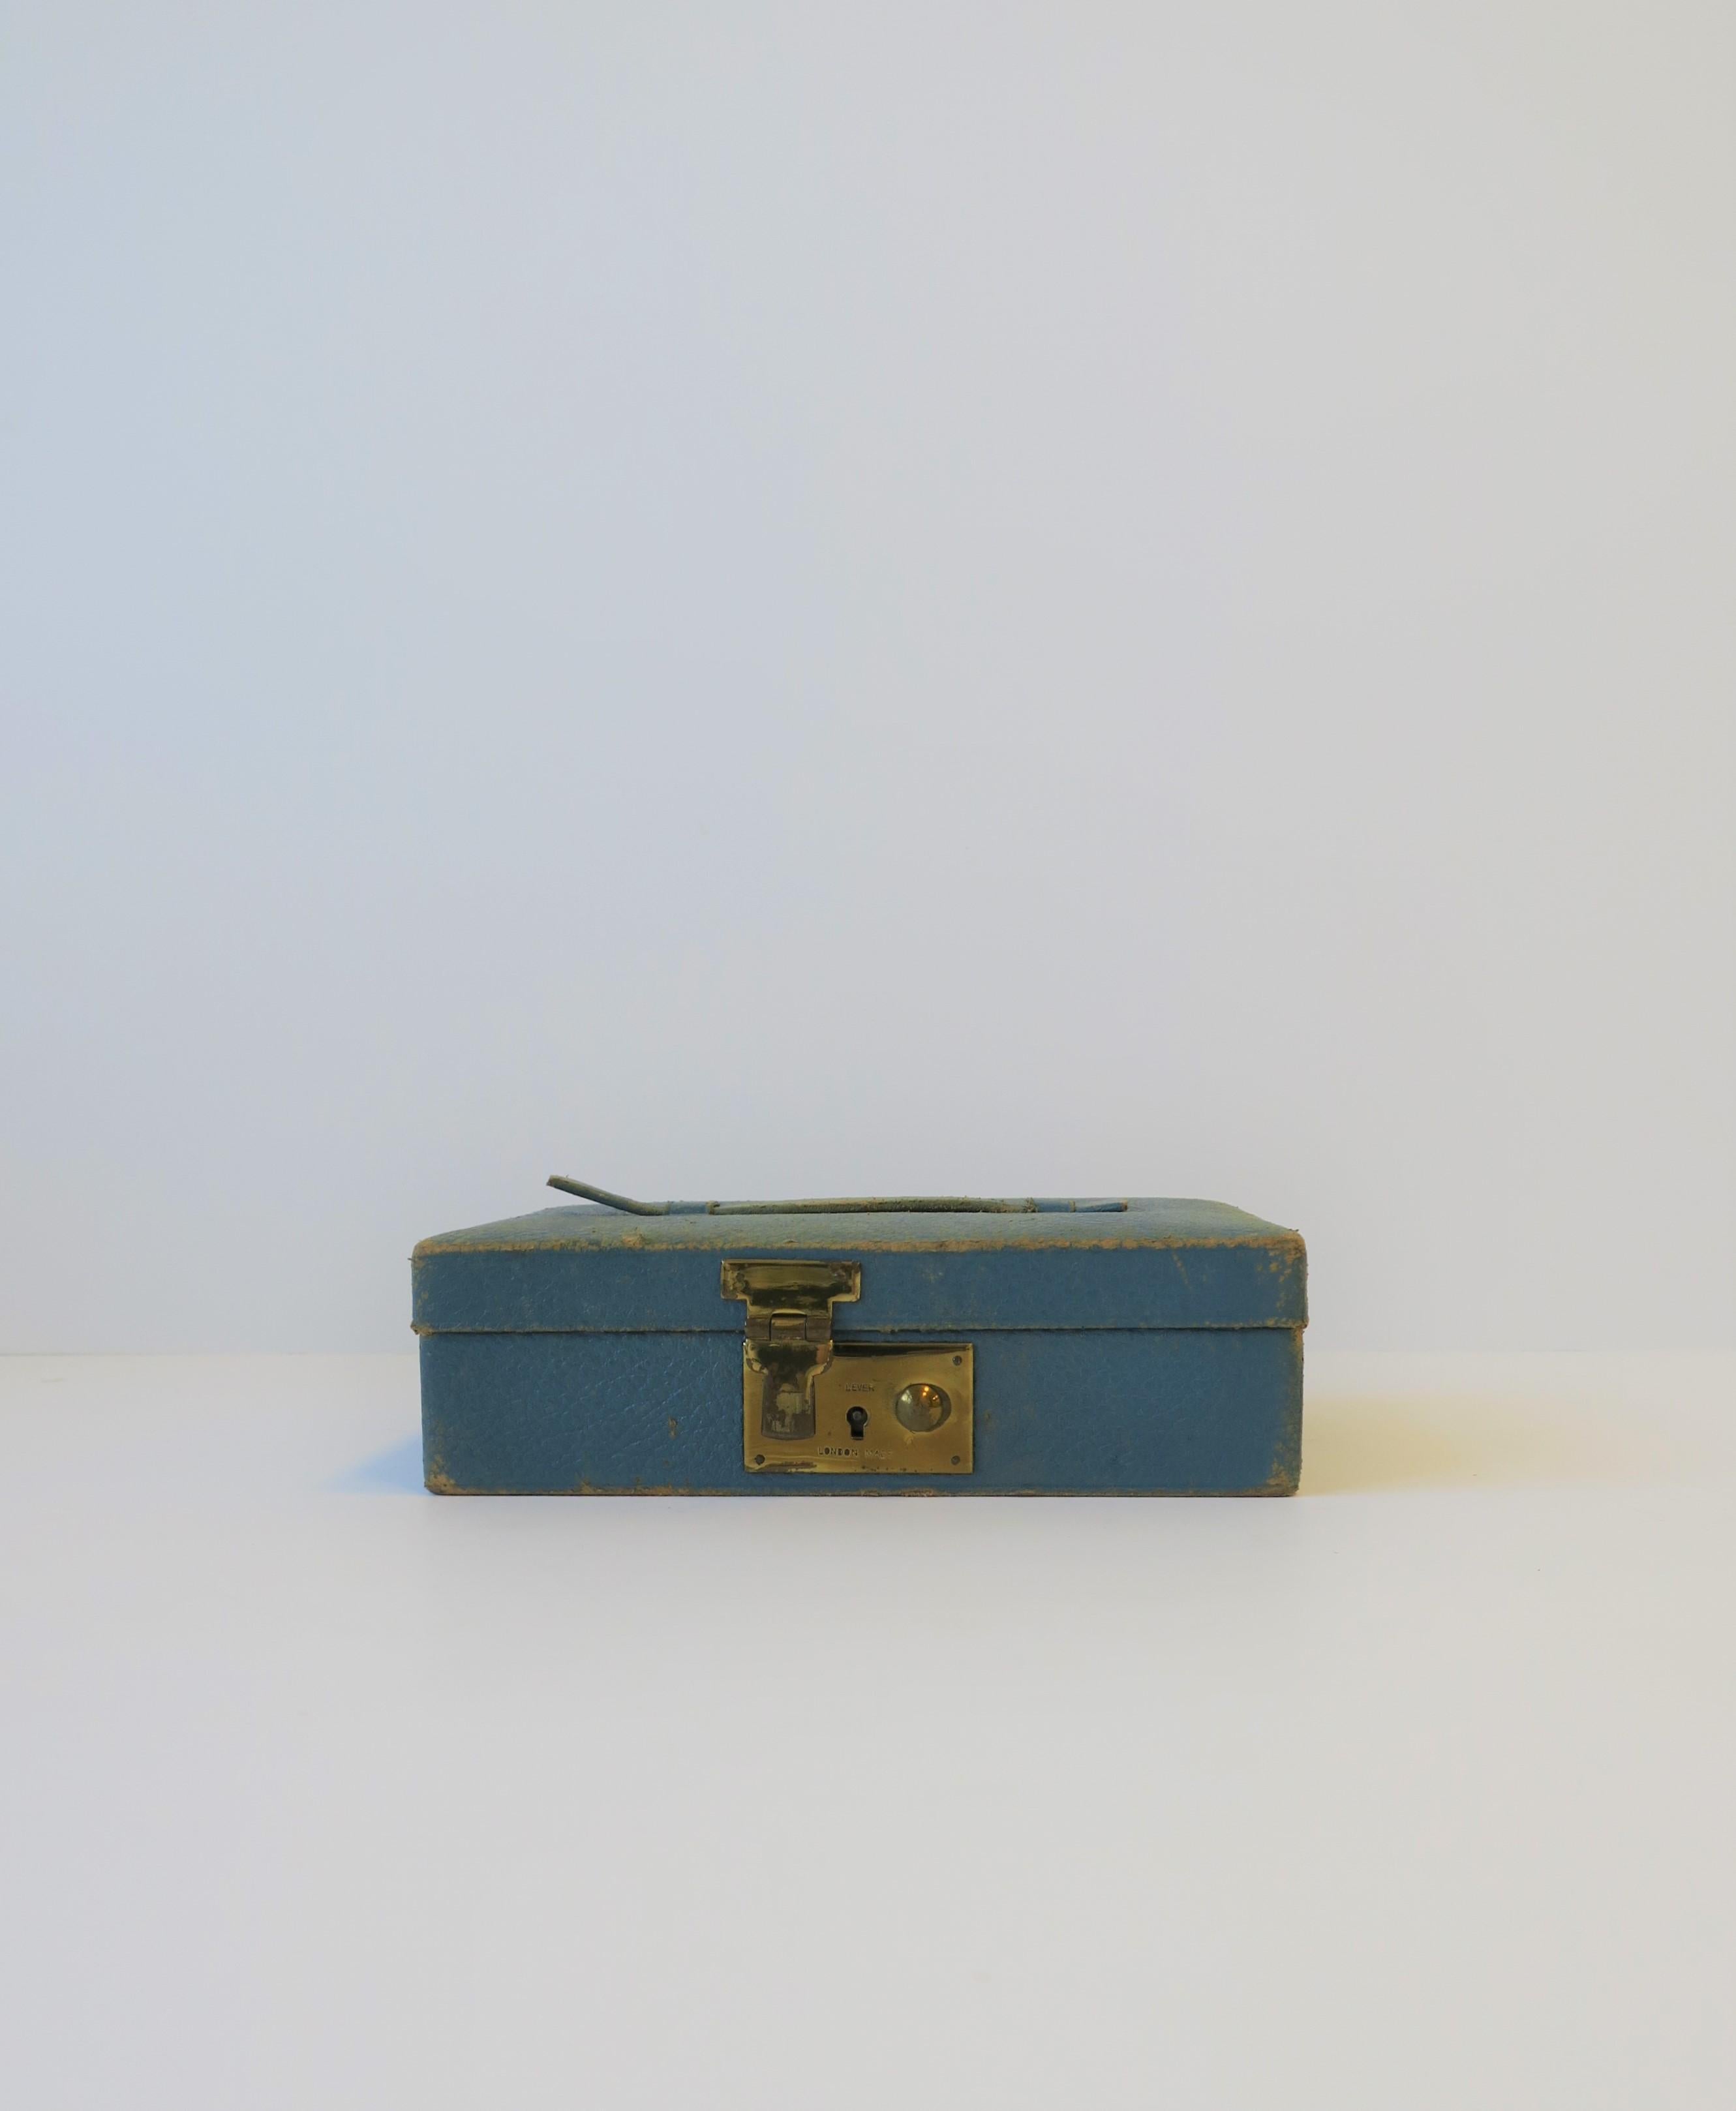 A blue leather, velvet, and brass jewelry box, made in London, circa early-20th century, England. Box is a 'Tiffany' blue leather, with a top handle, brass closure in front, and velvet lined, including a jewelry pillow. Brass closure is marked